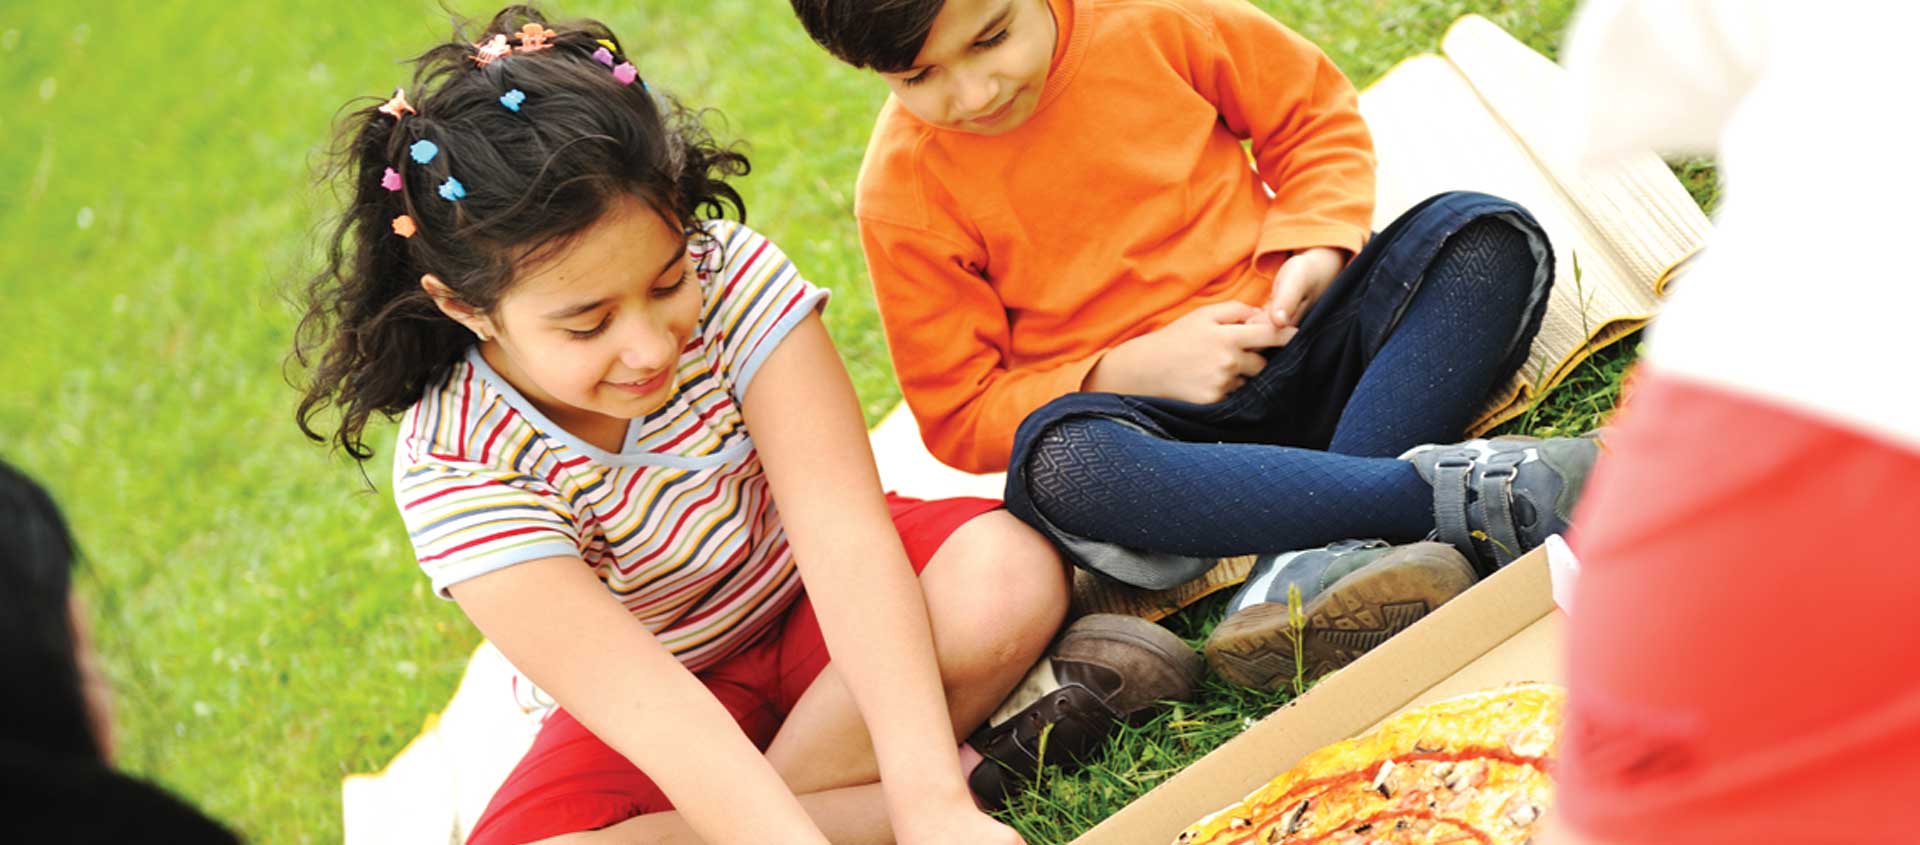 A borther and sister on a picnic sharing pizza.